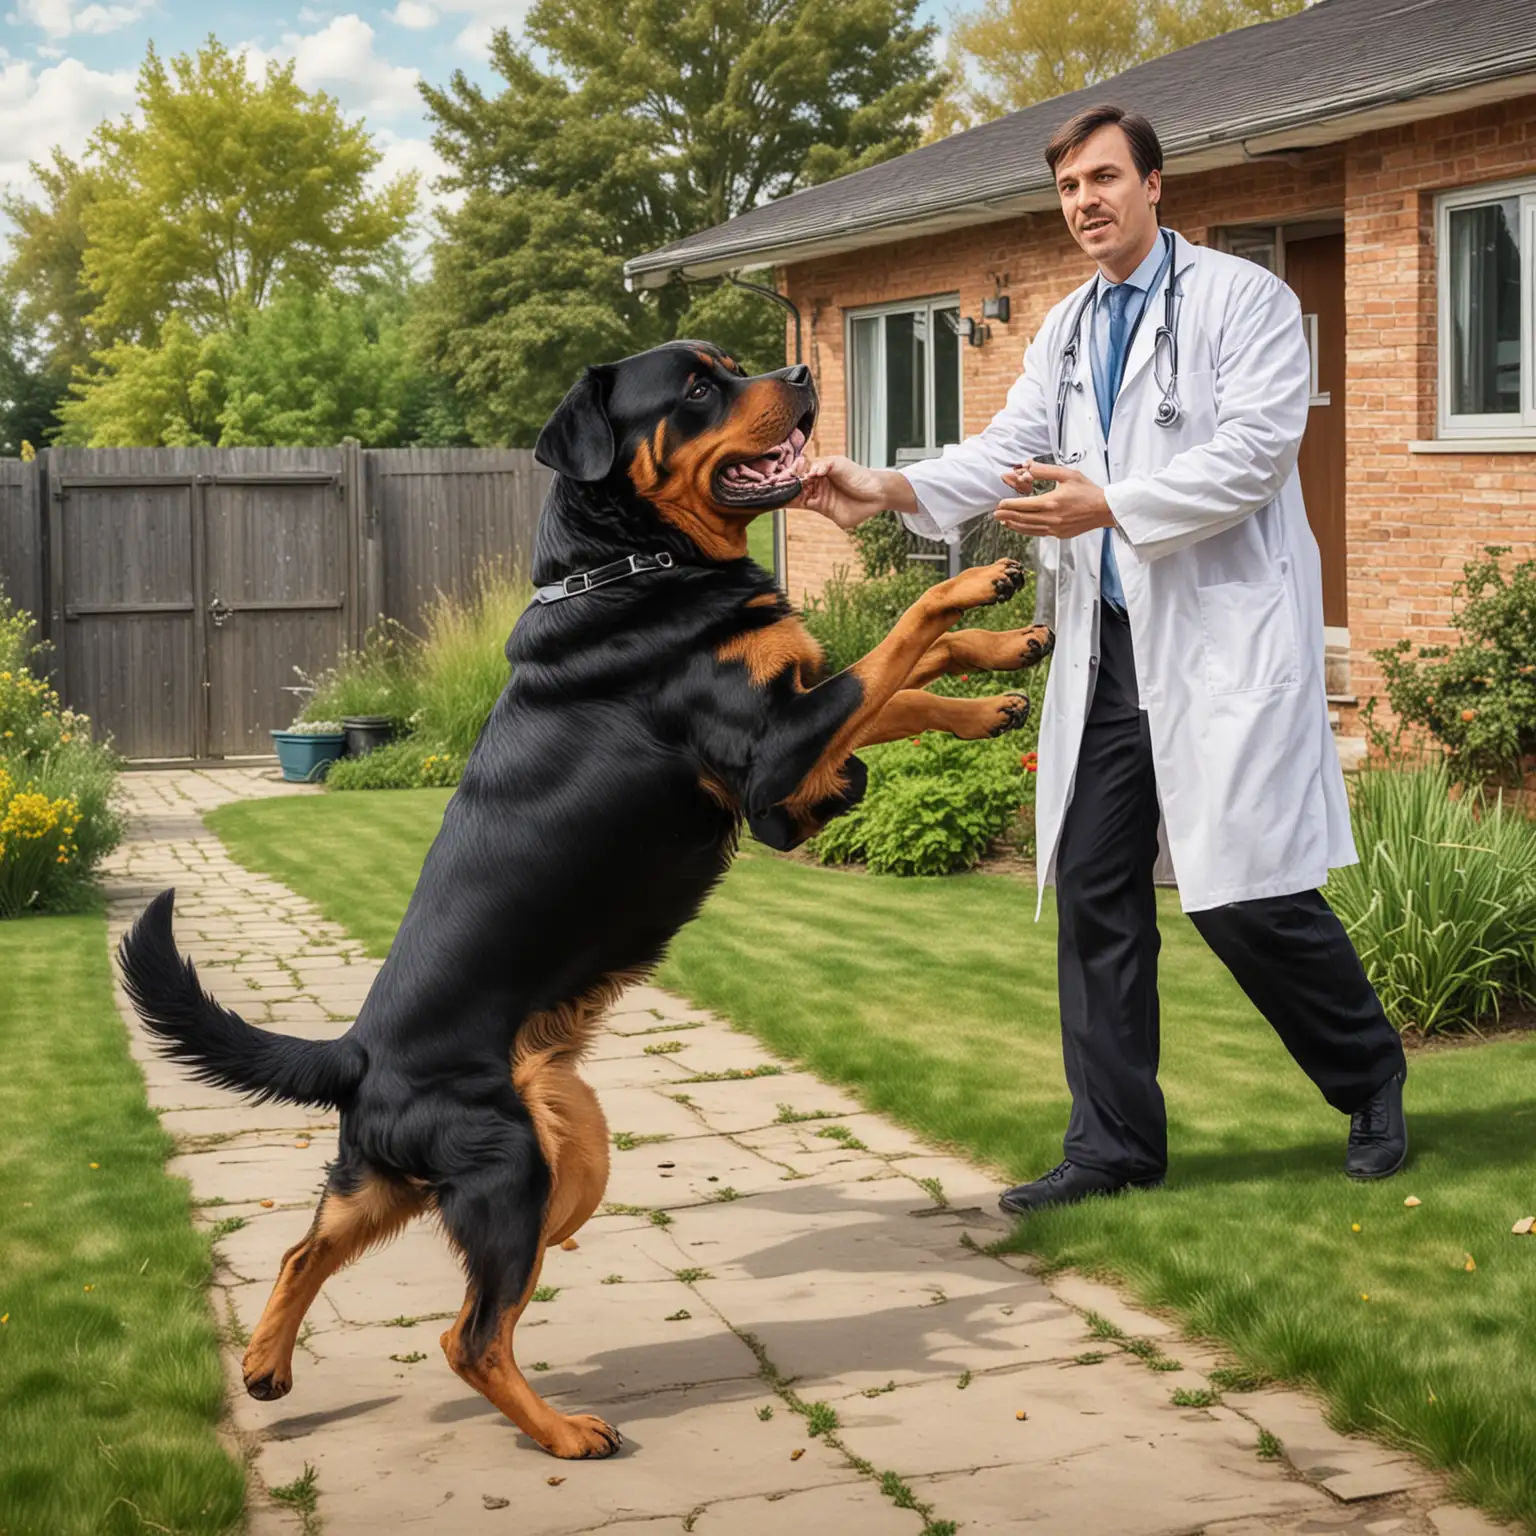 Rotweiler Dog Attacks Male Doctor in House Yard